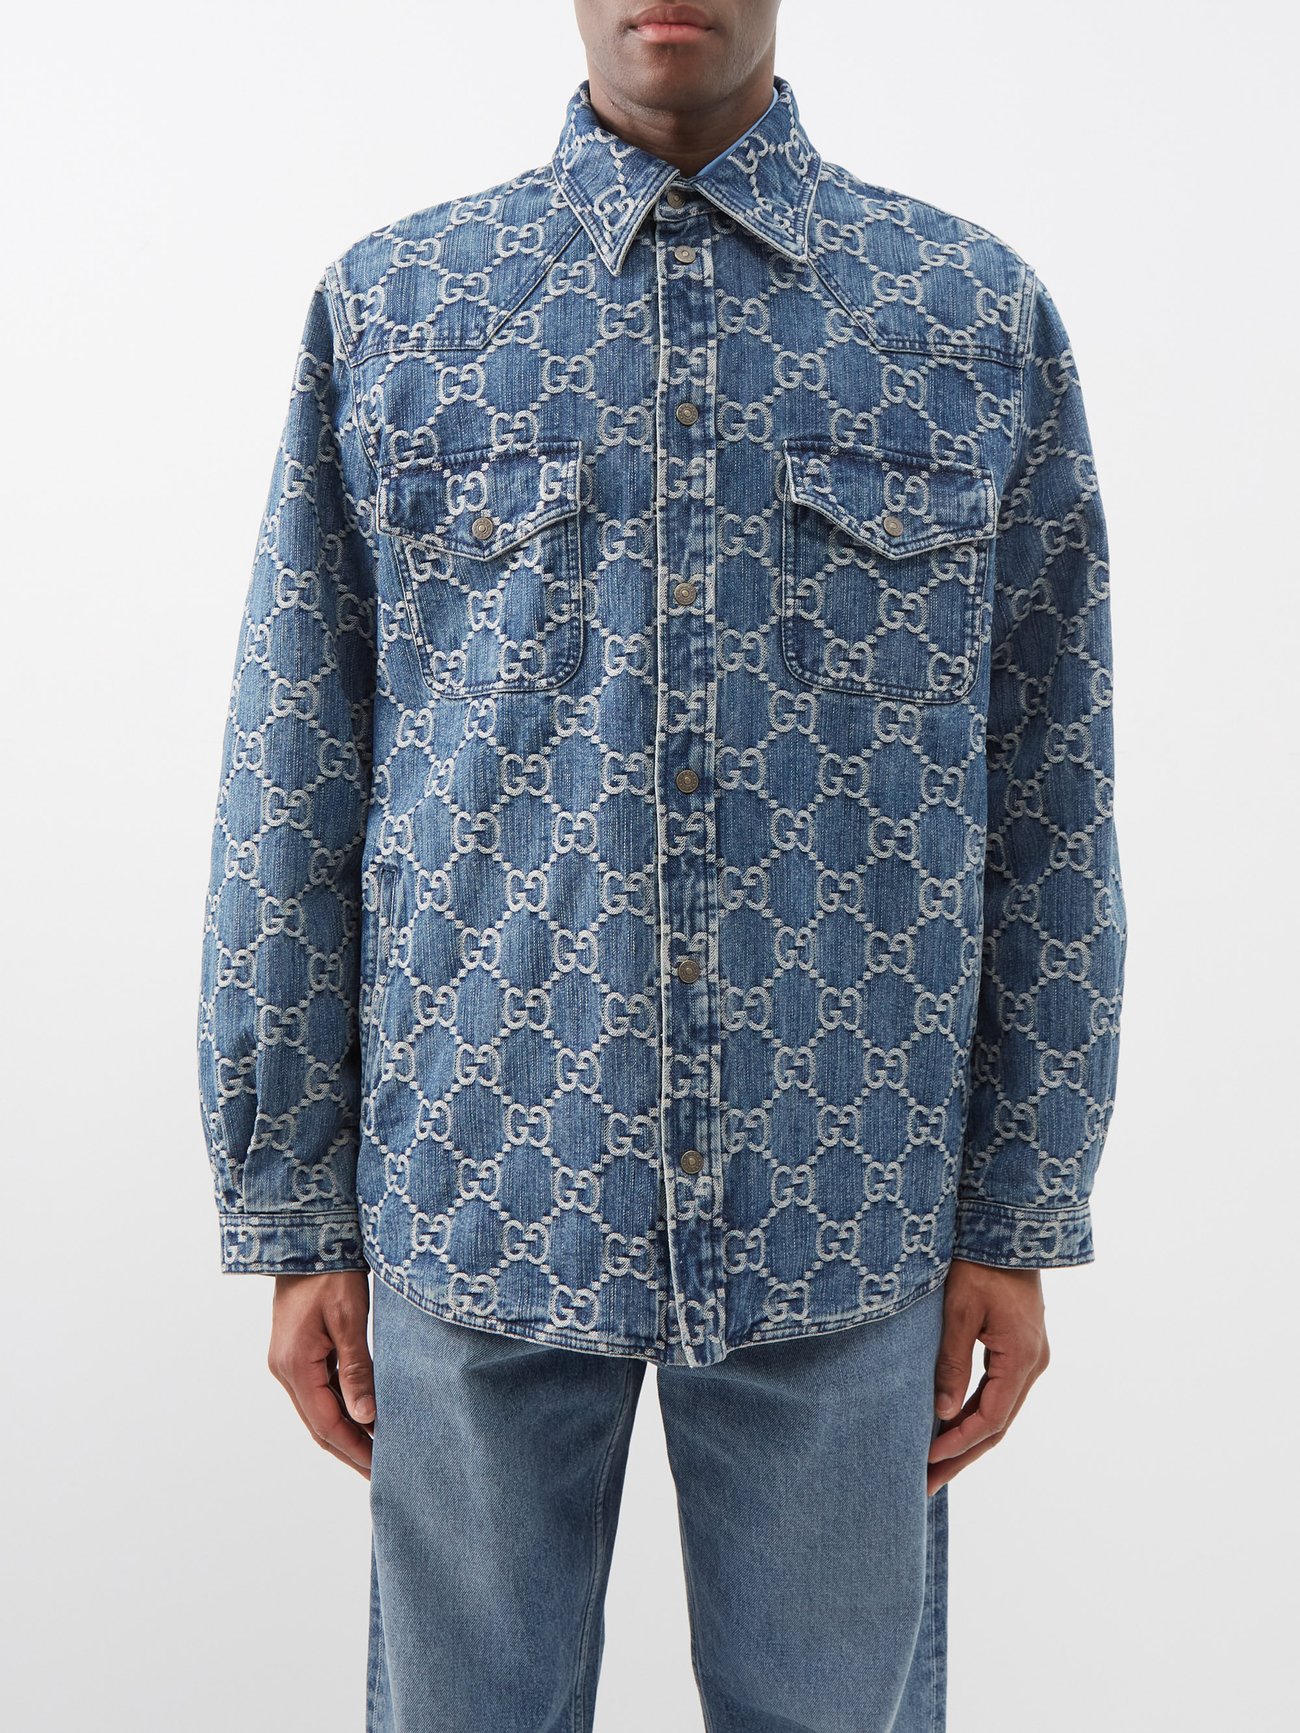 GG Oversized Cotton Shirt in Blue - Gucci